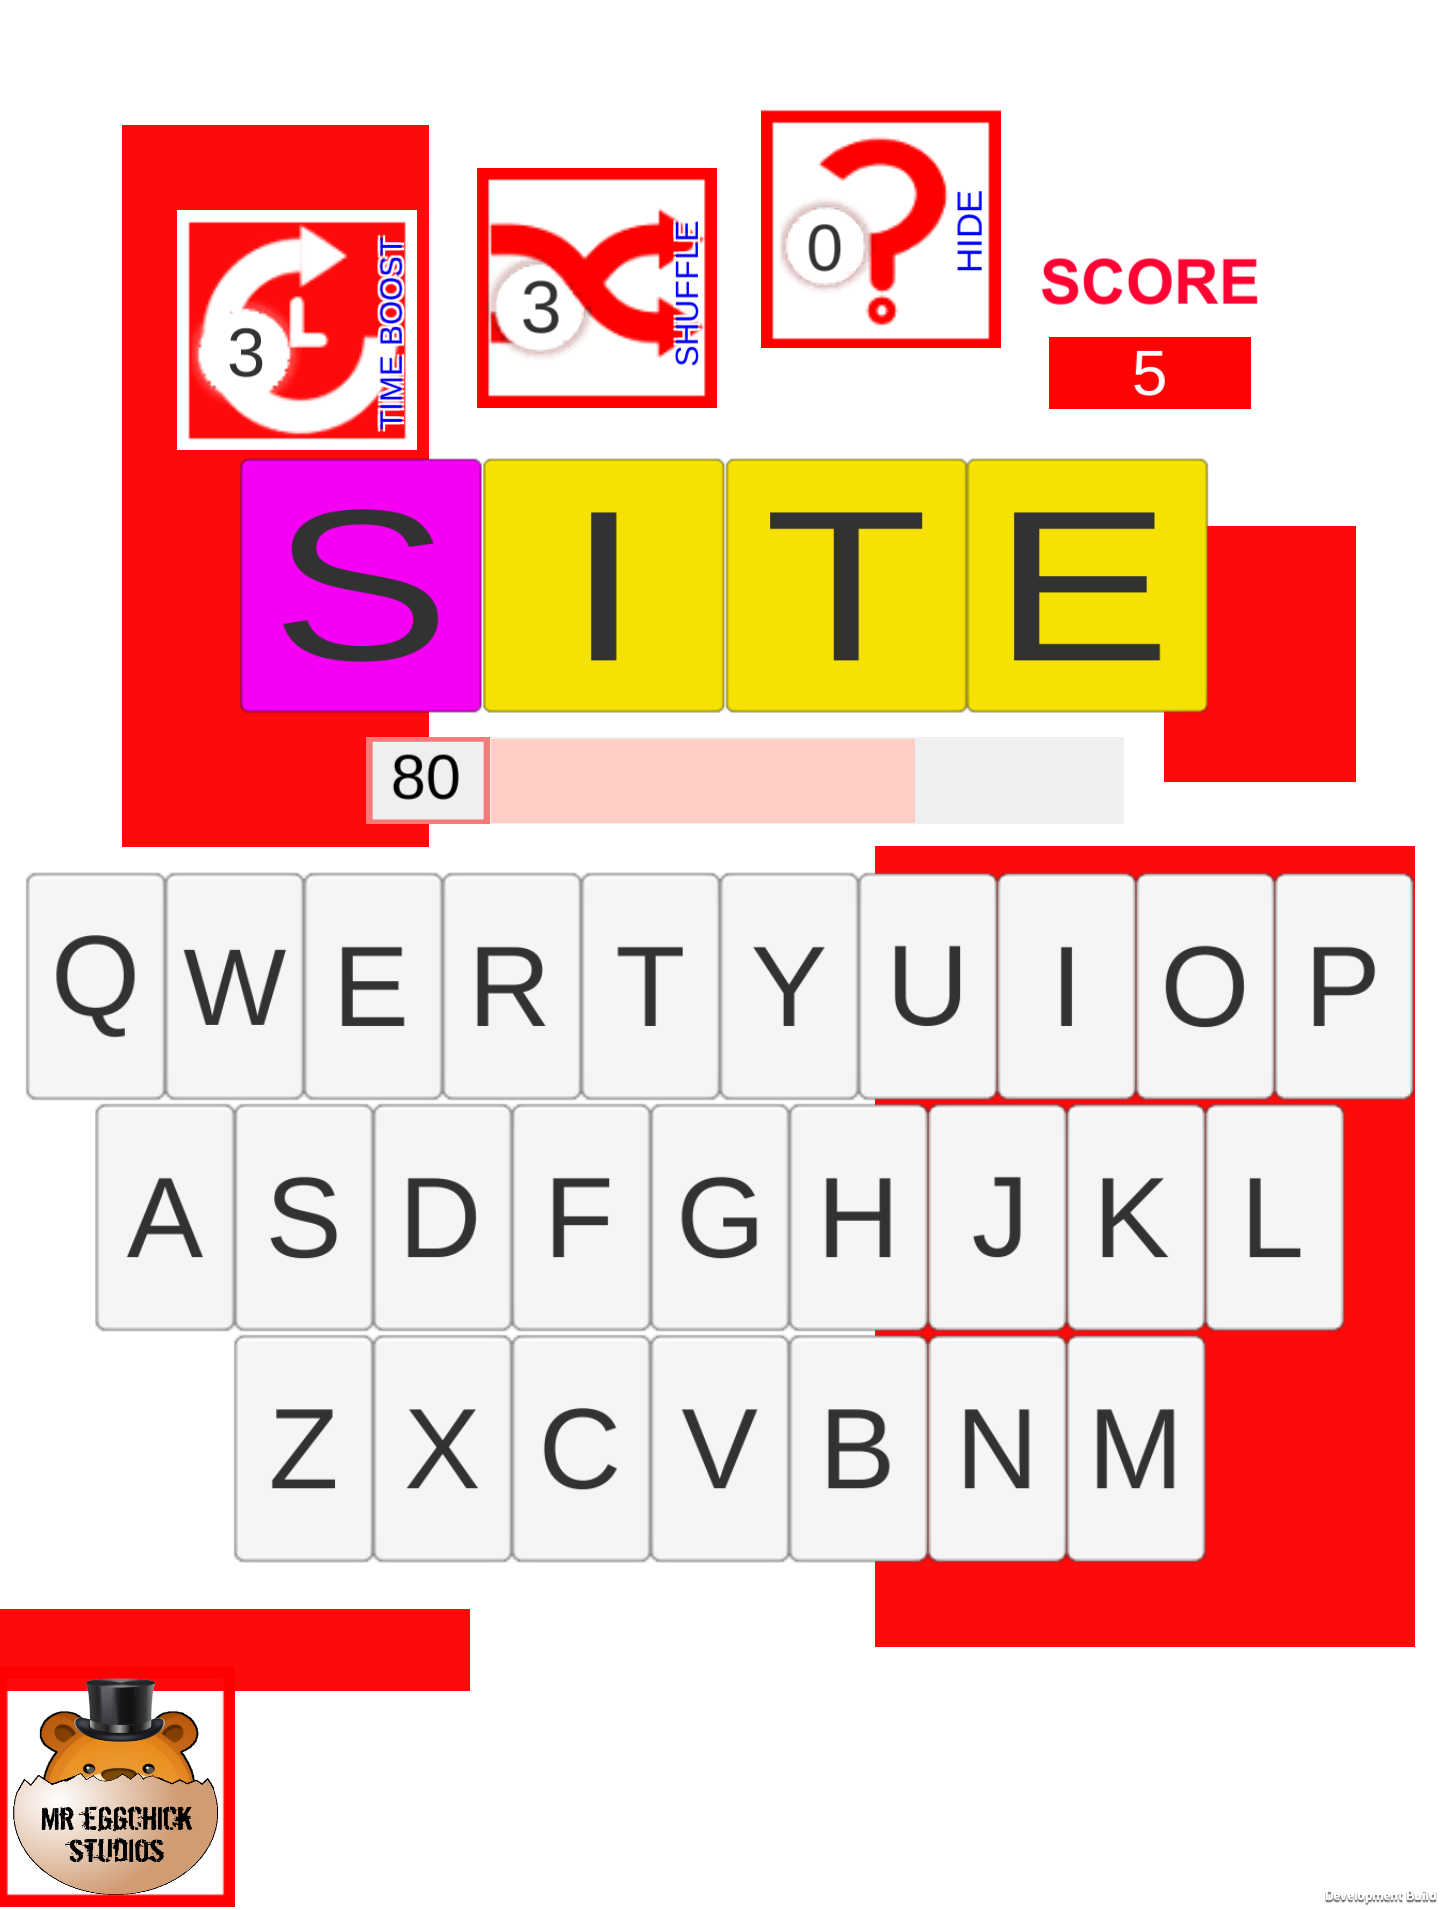 Change the letter S to L to make the word LITE